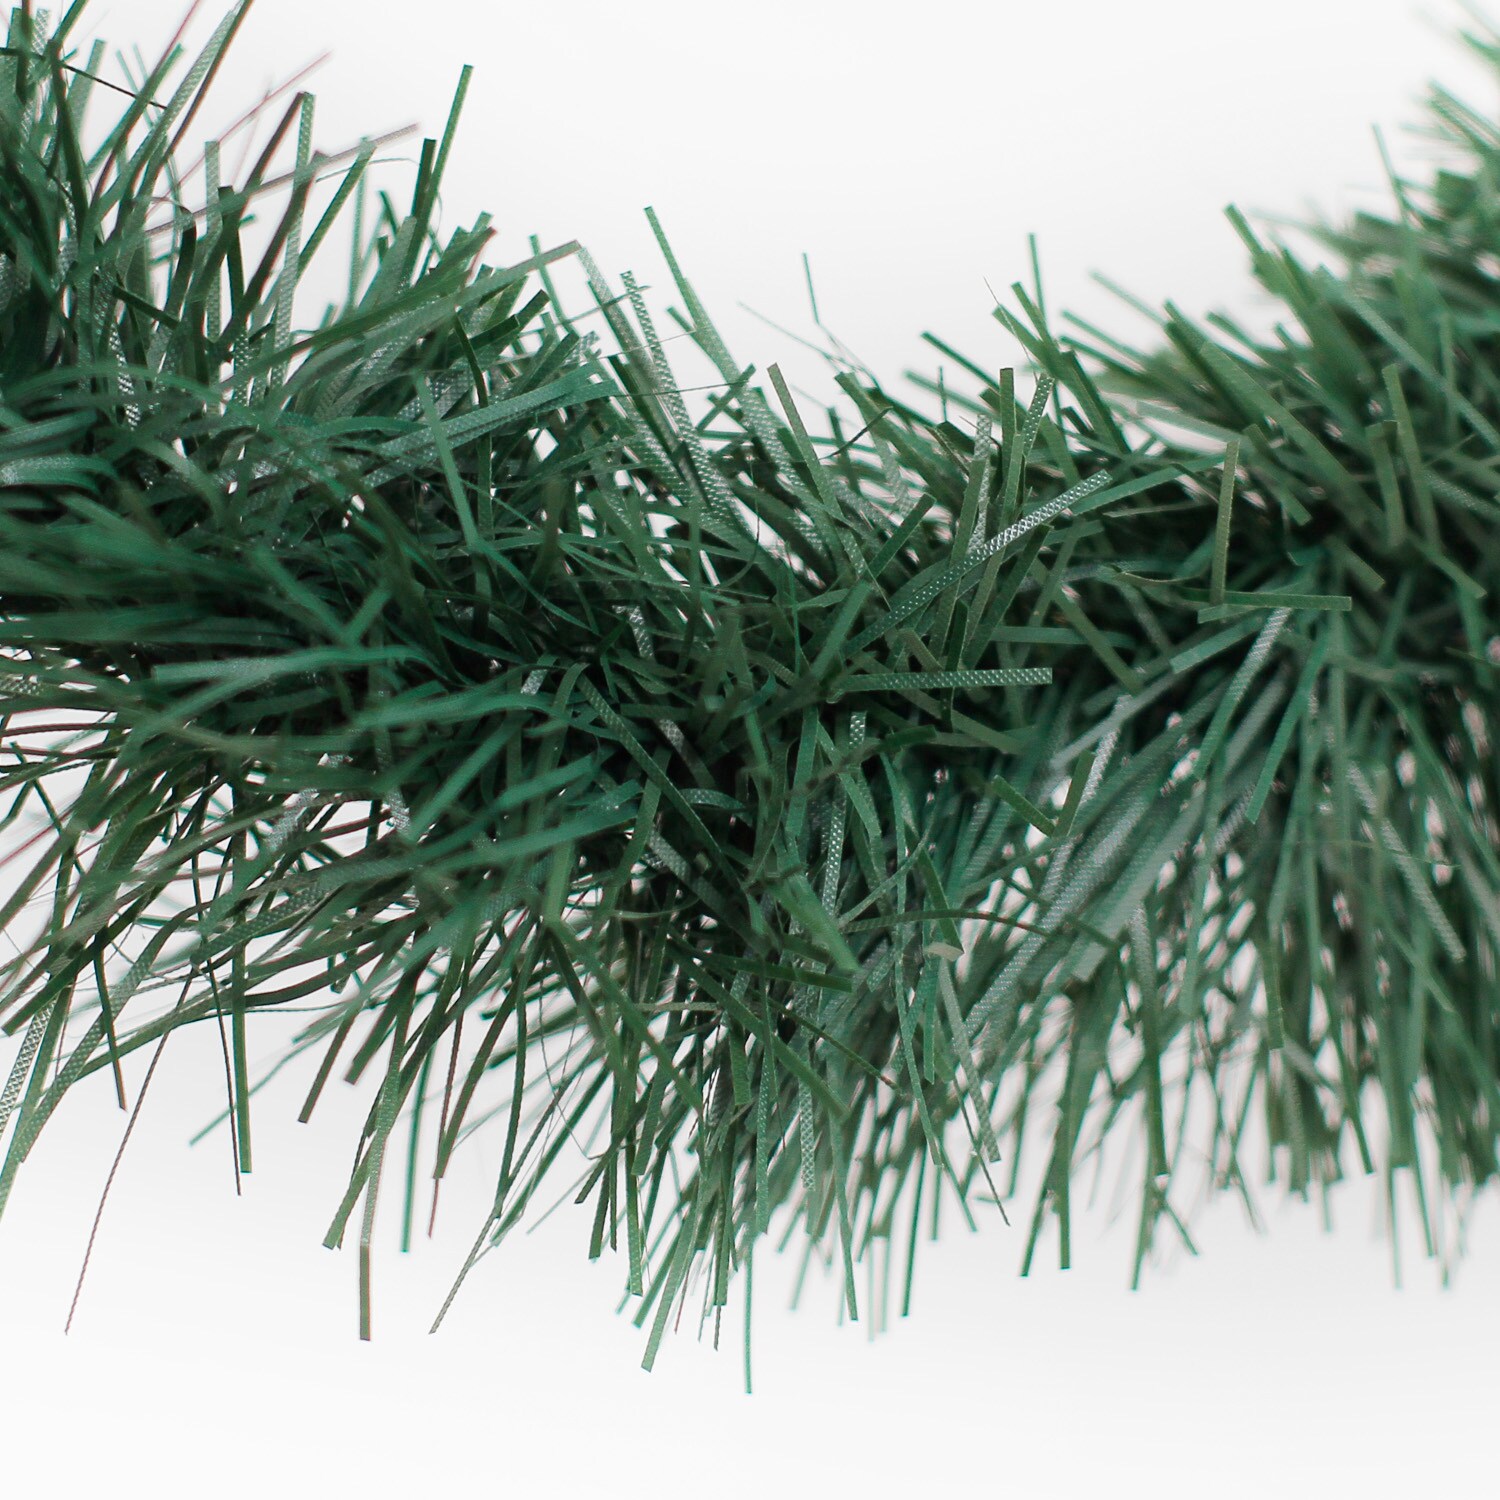 457 cm Details about   Christmas Pine Garland 15 Foot Indoor Outdoor Flame Retardant Holiday 